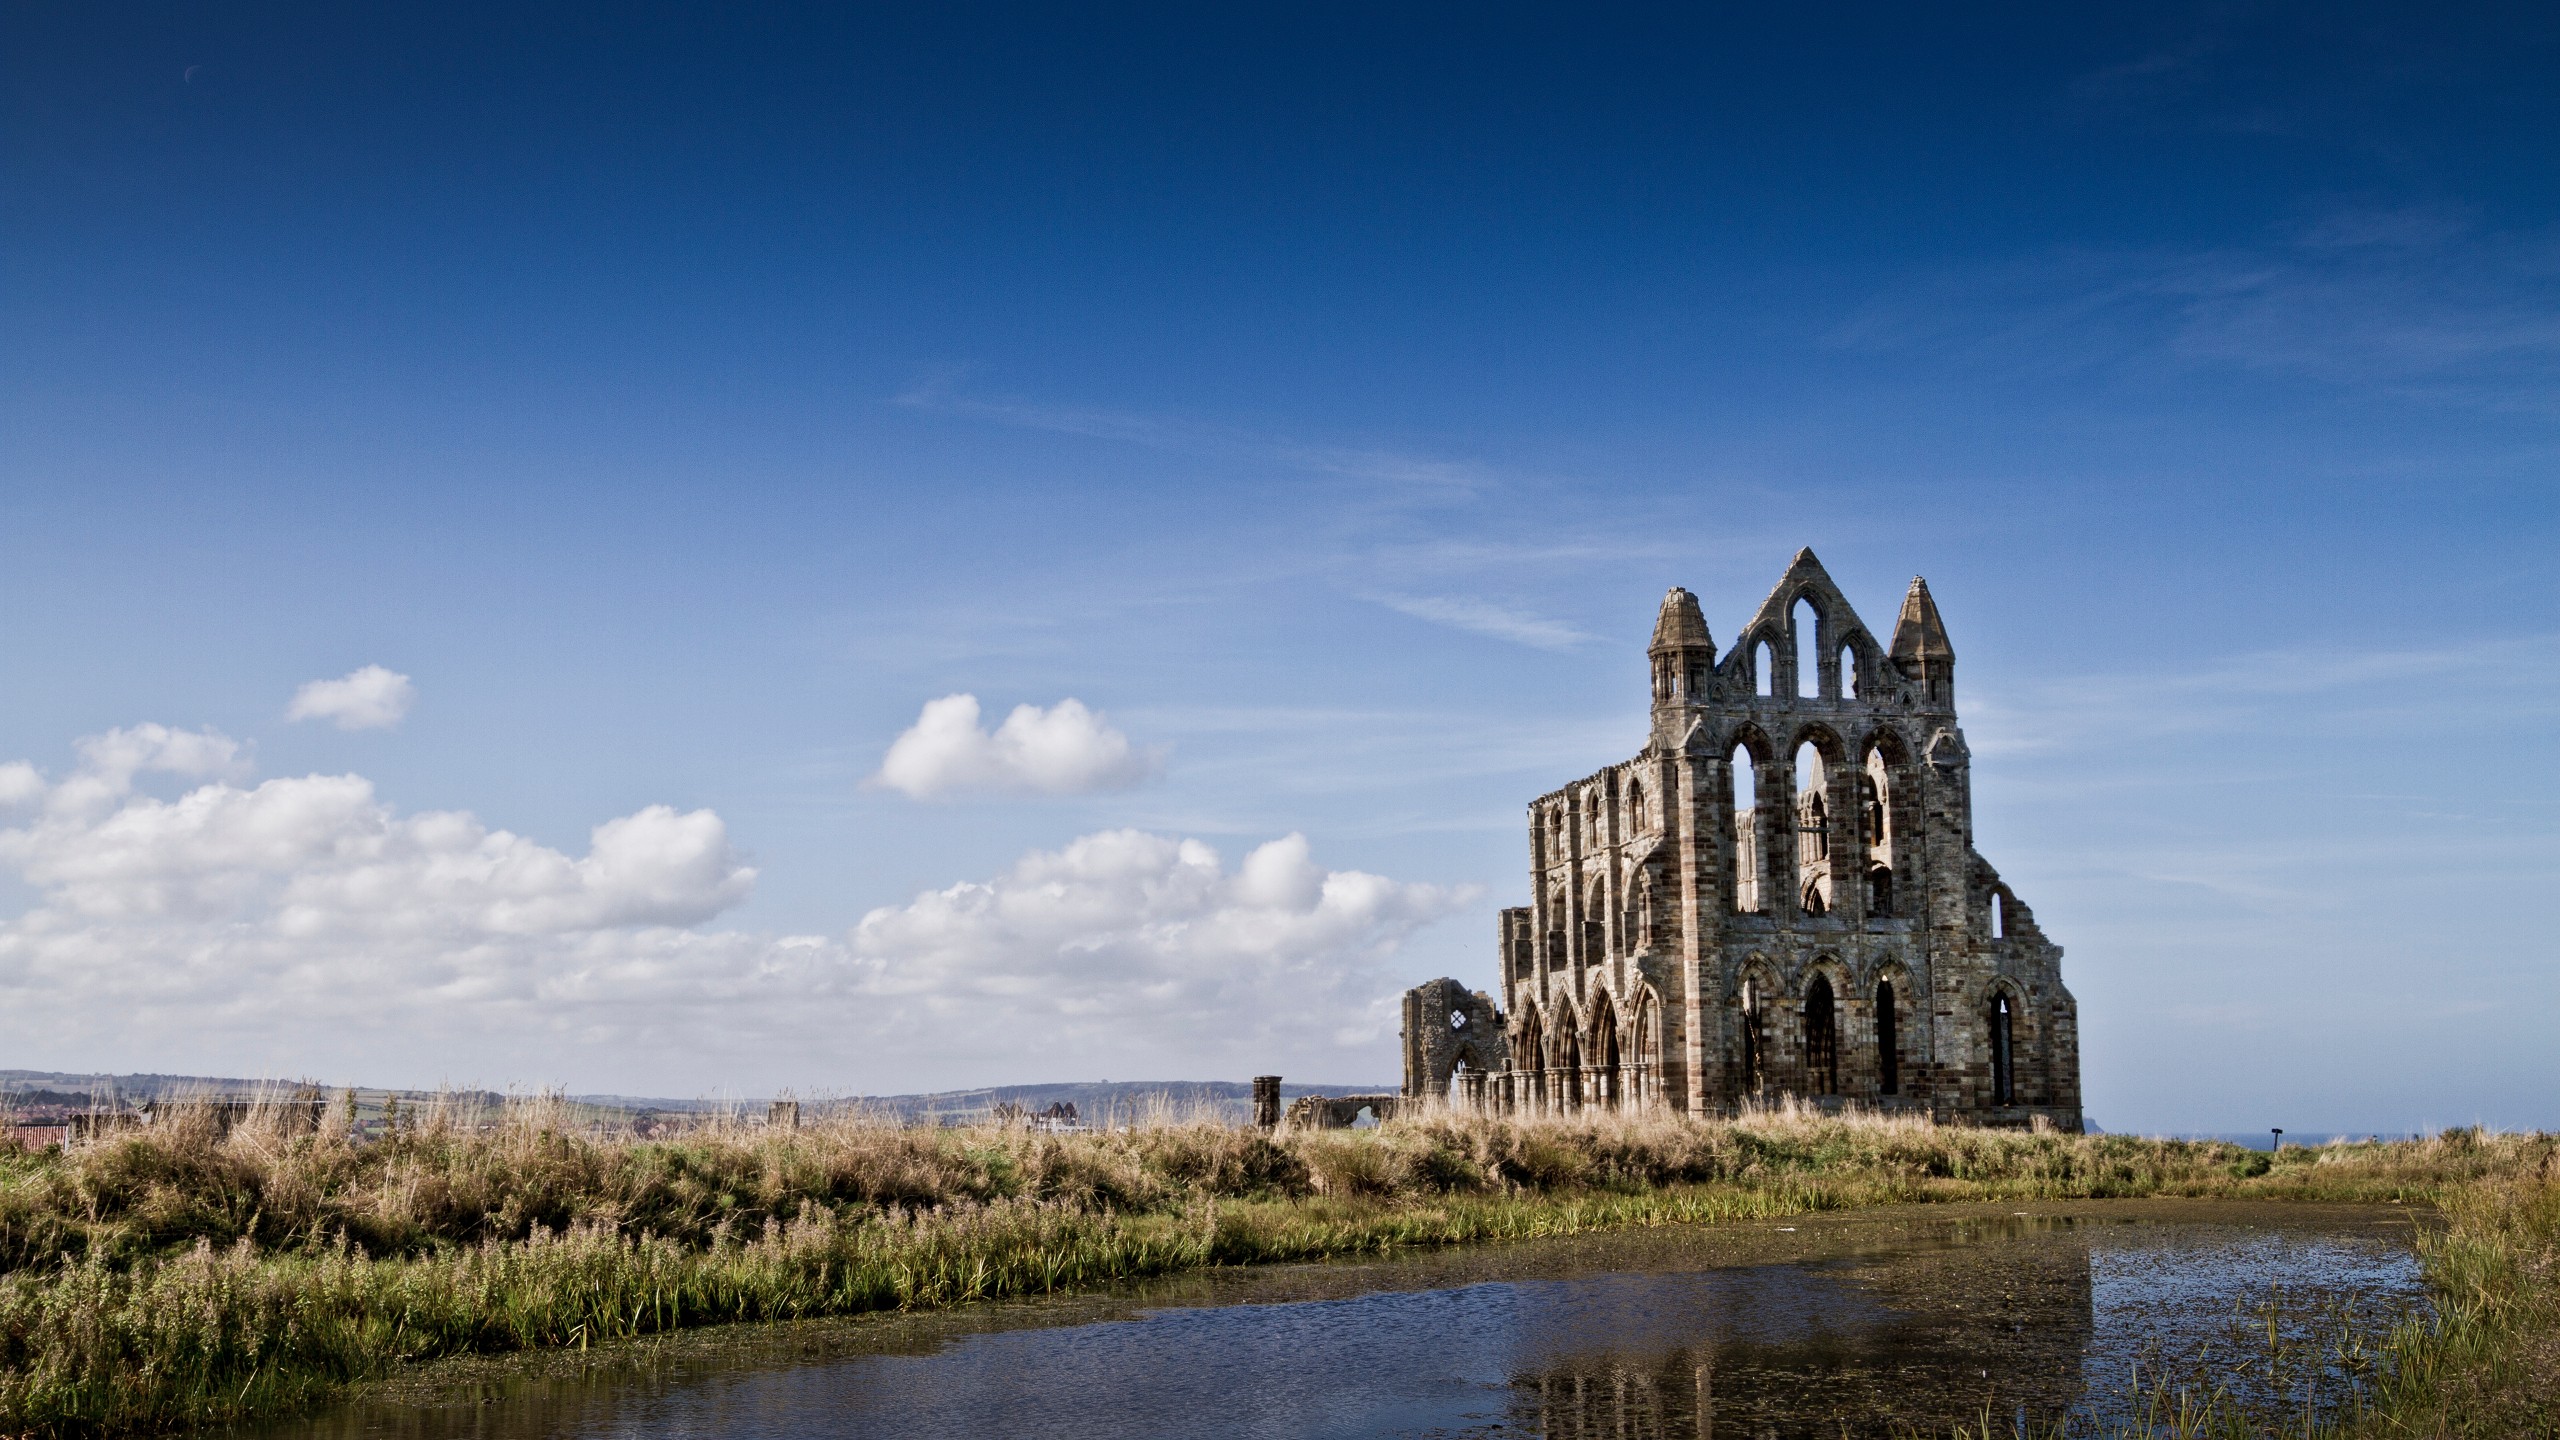 General 2560x1440 church Whitby Abbey England river ruins landscape sky